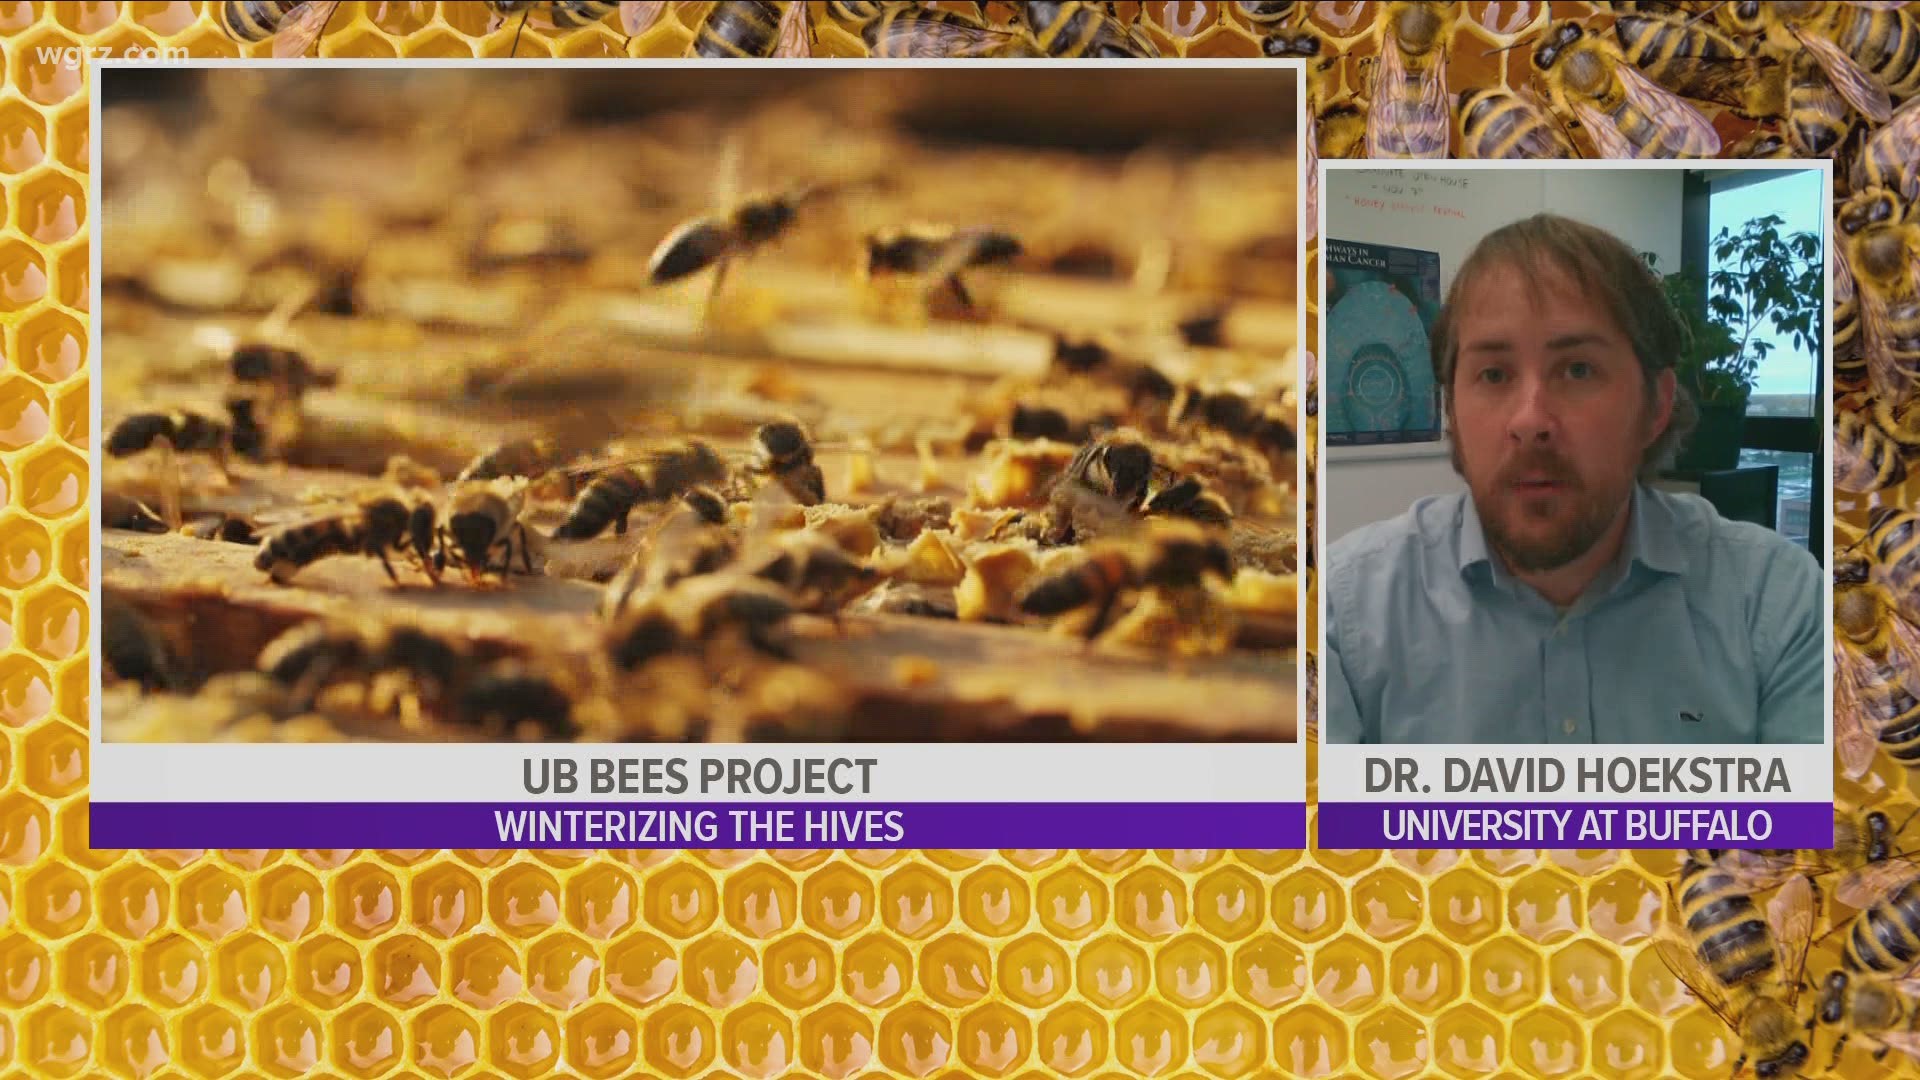 we talked with a professor, Dr. David Hoekstra... who is the director of the "U-B Bees" project